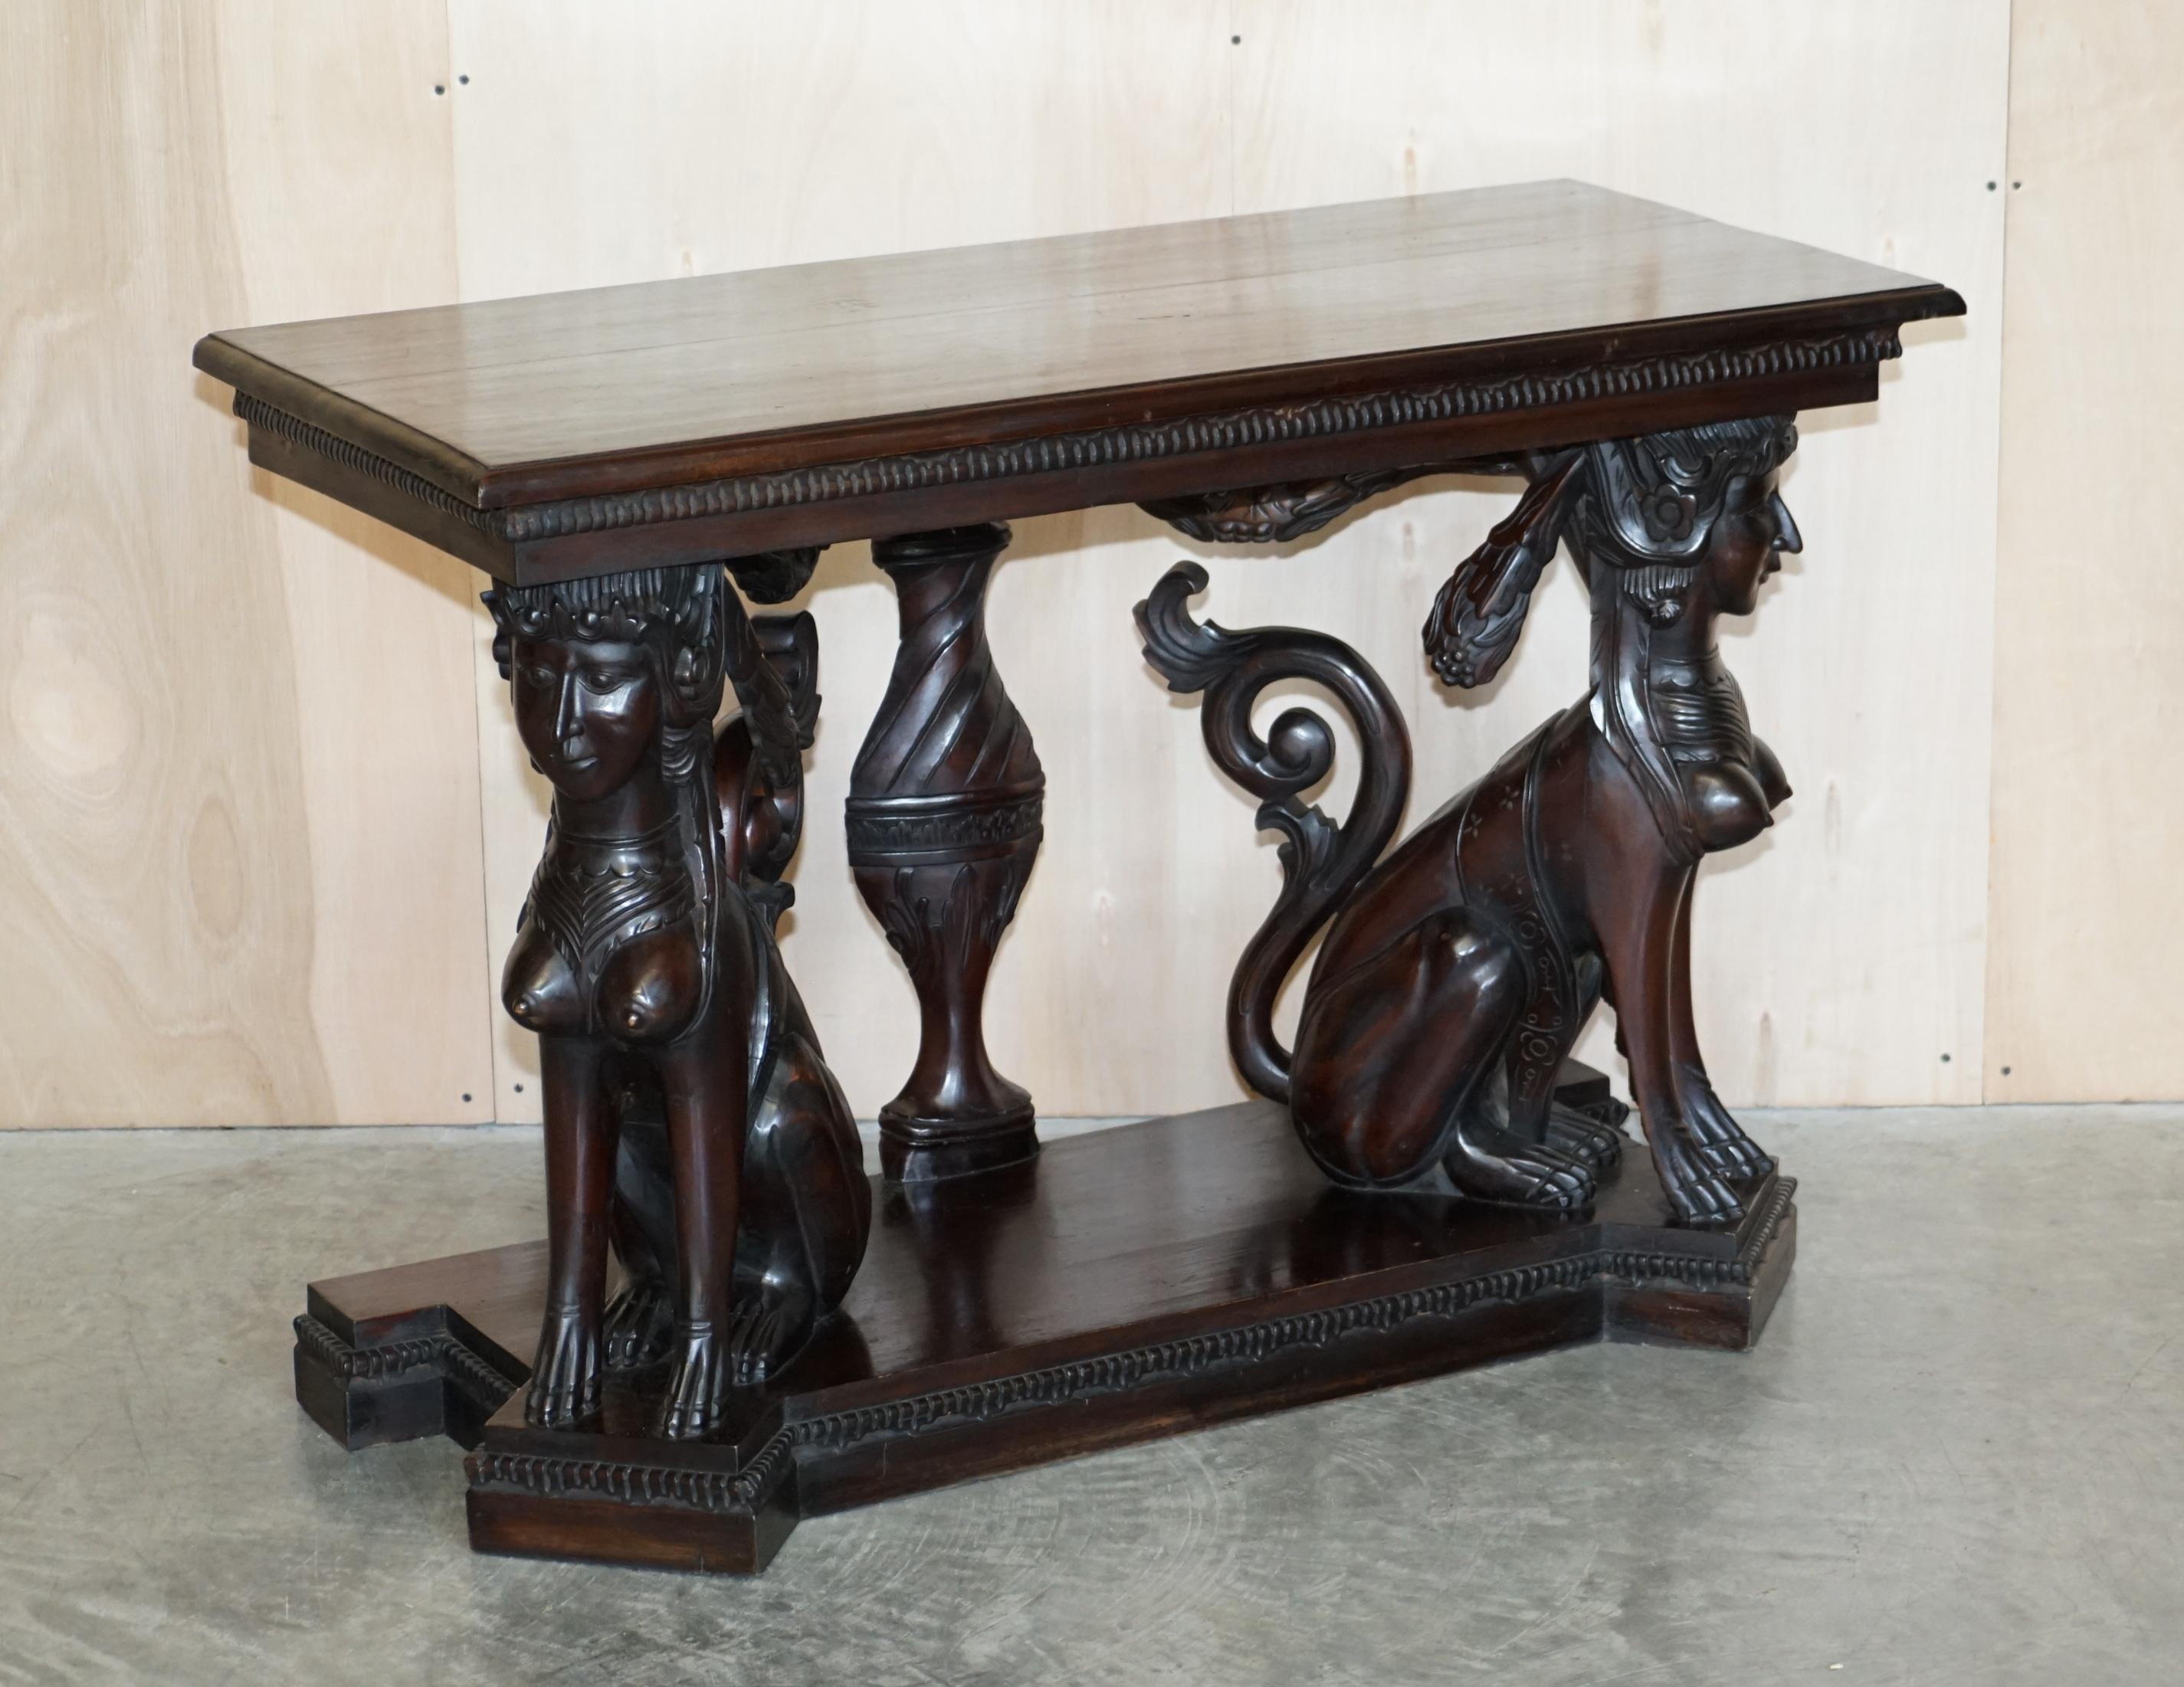 We are delighted to offer for sale this very decorative, heavily carved, Egyptian Revival console table with twin Sphinx pillards.

A very good looking and expertly crafted piece, if your looking for pure art furniture then look no further, this